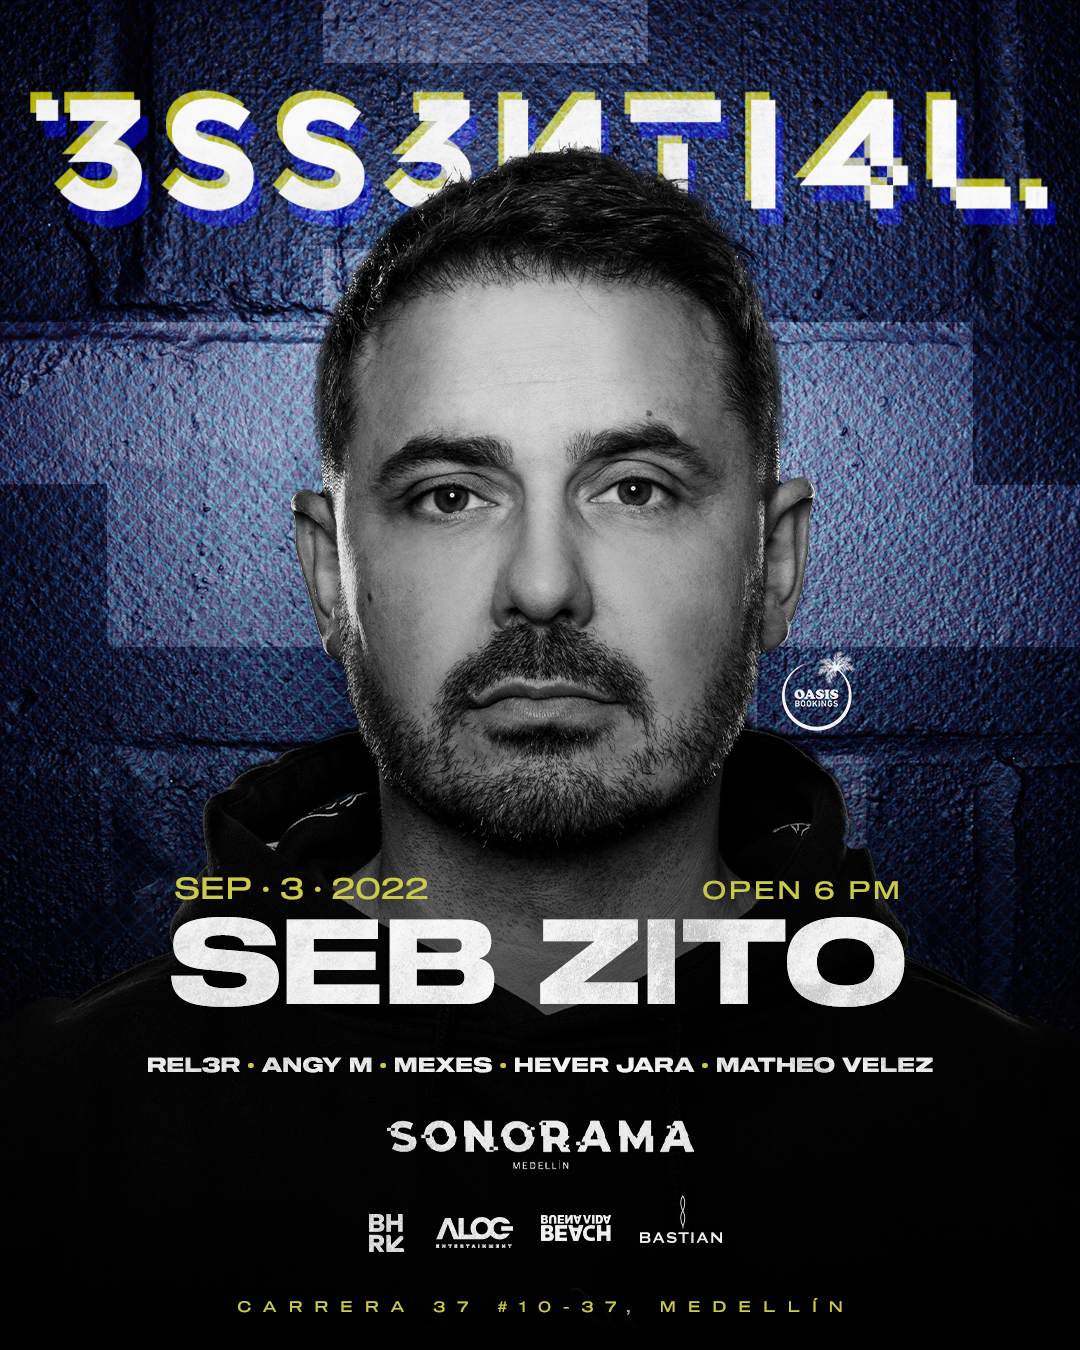 3SS3NT14L with Seb Zito - フライヤー表